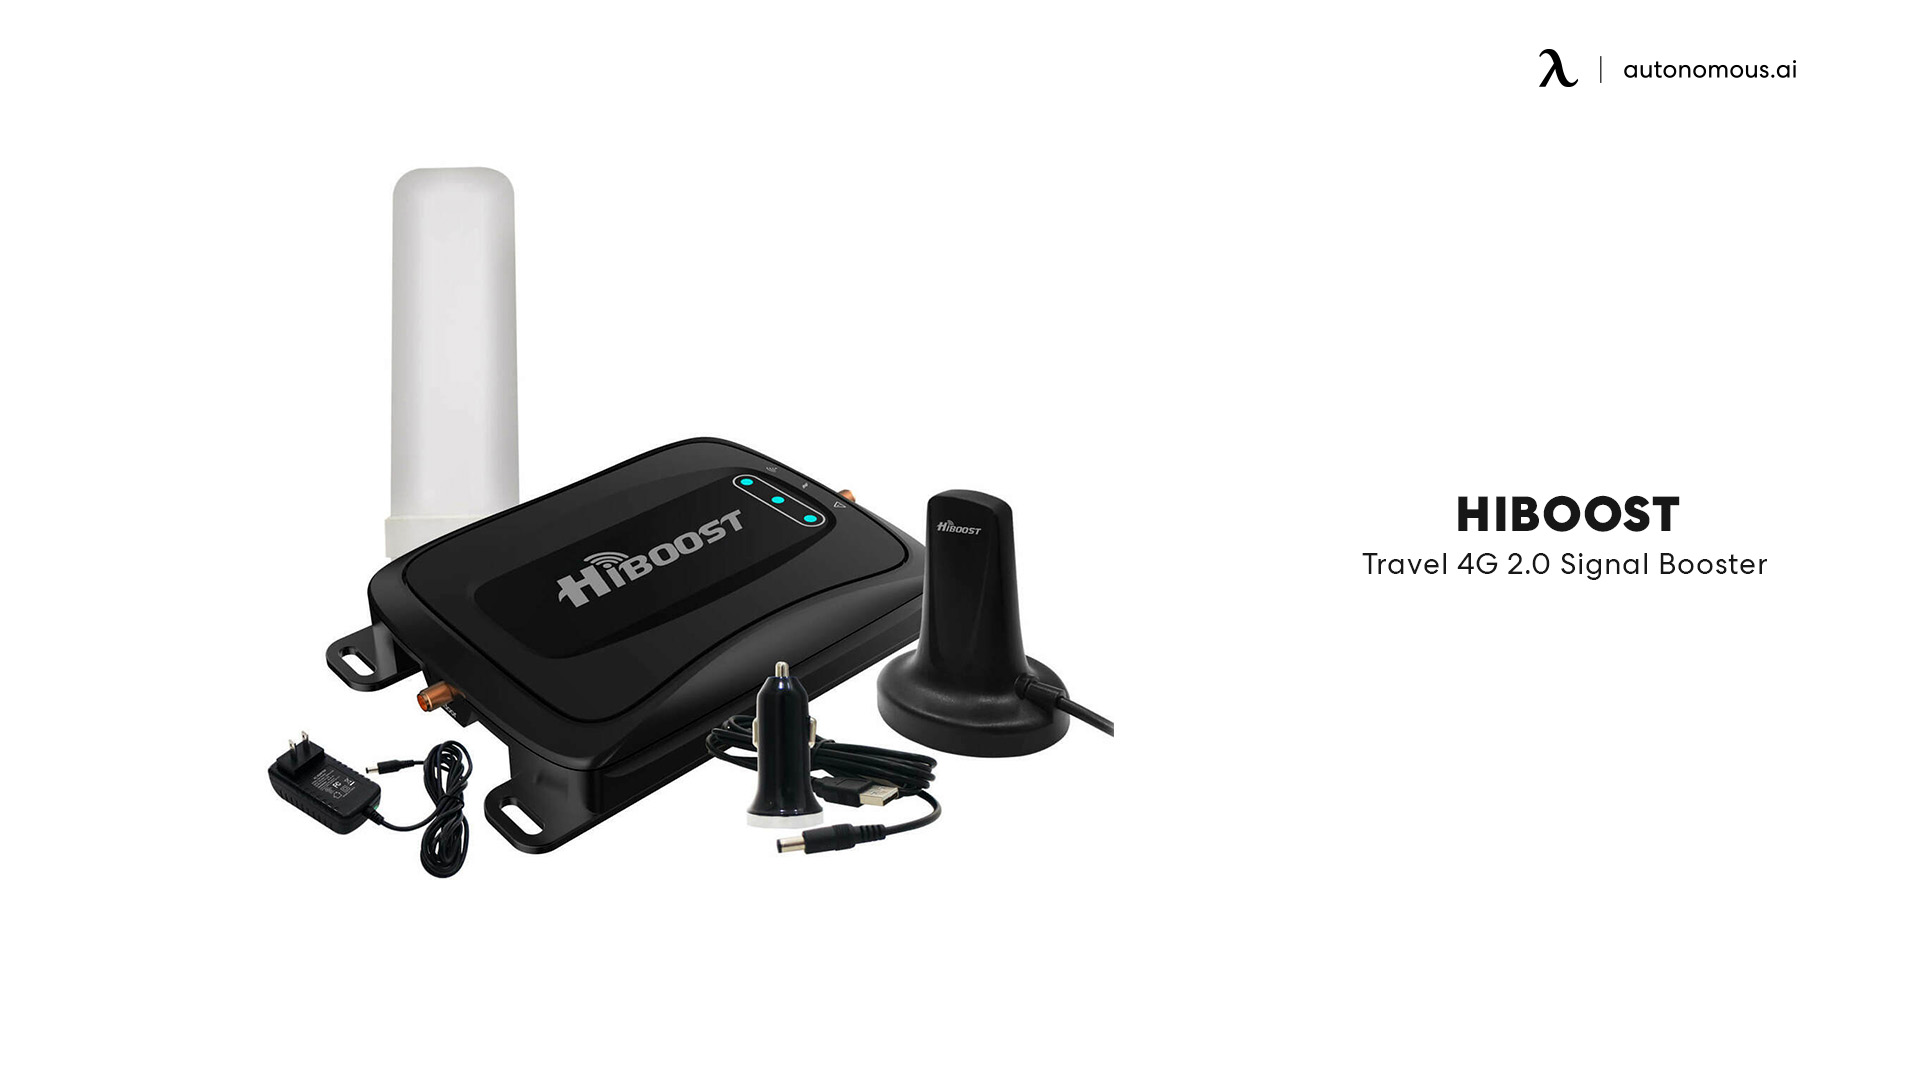 HiBoost Travel 4G 2.0 portable cell phone signal booster